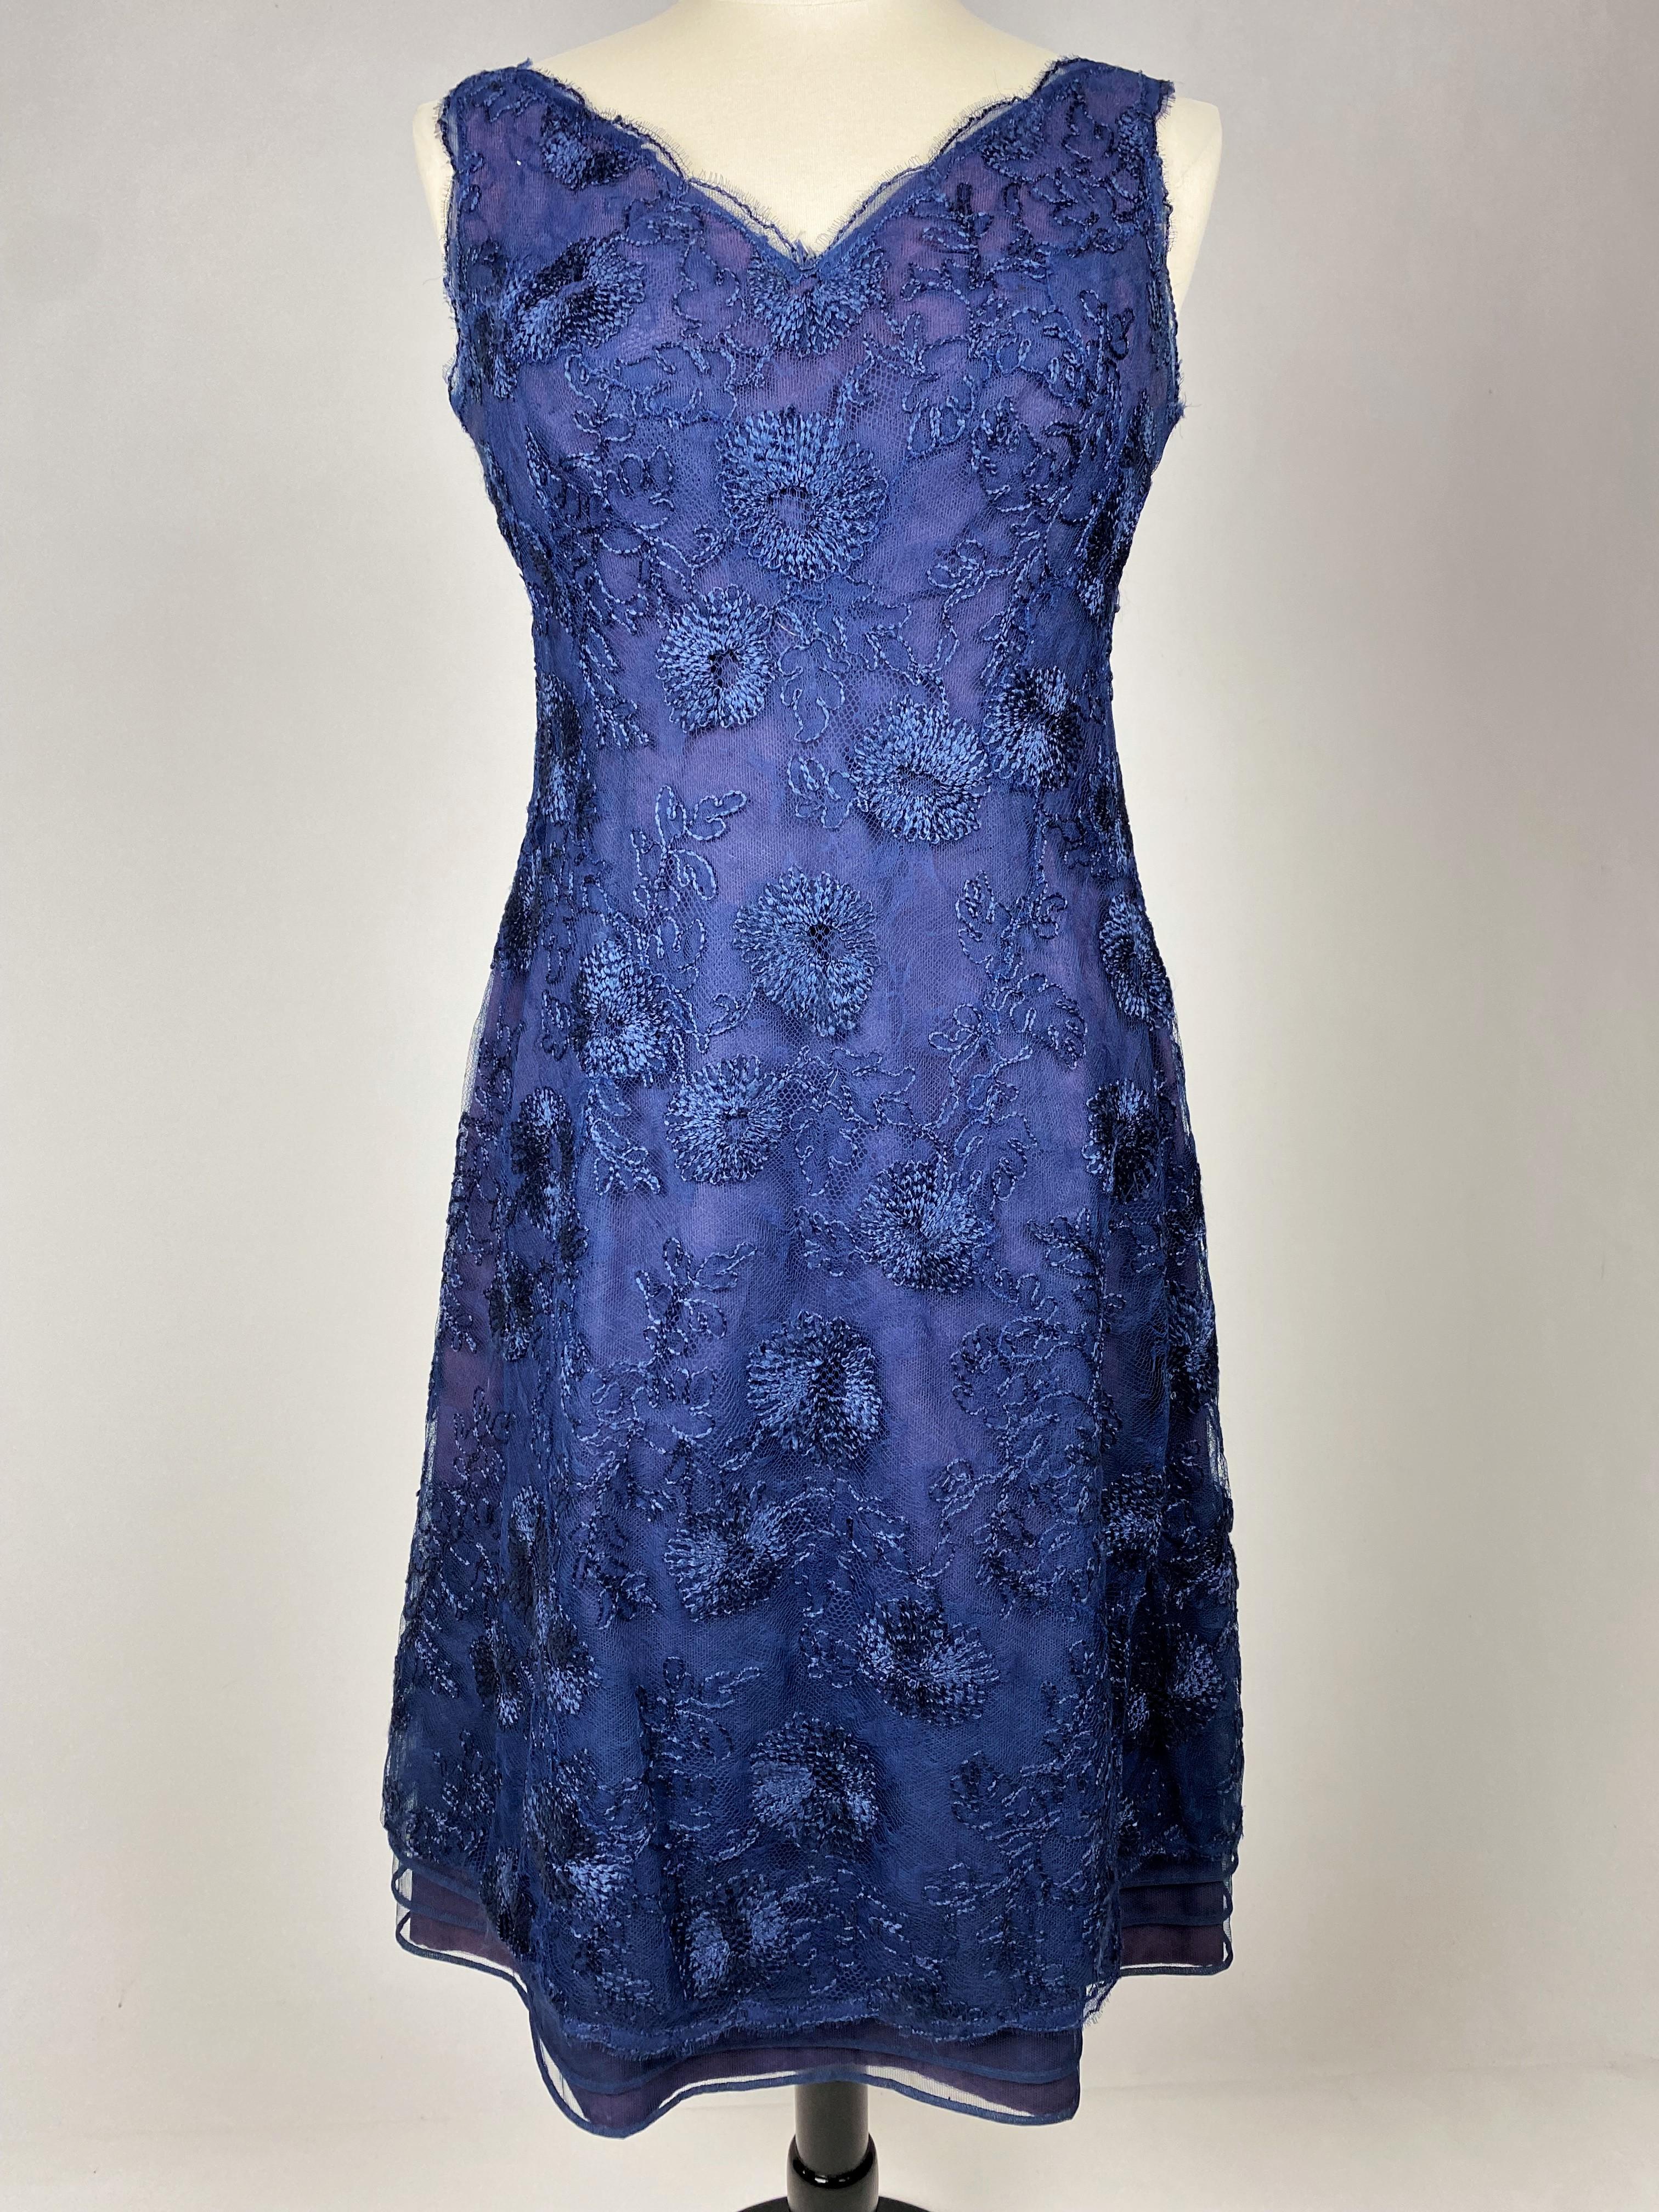 A Jacques Heim Cocktail Chiffon Embroidered Dress and bolero Circa 1965 For Sale 5